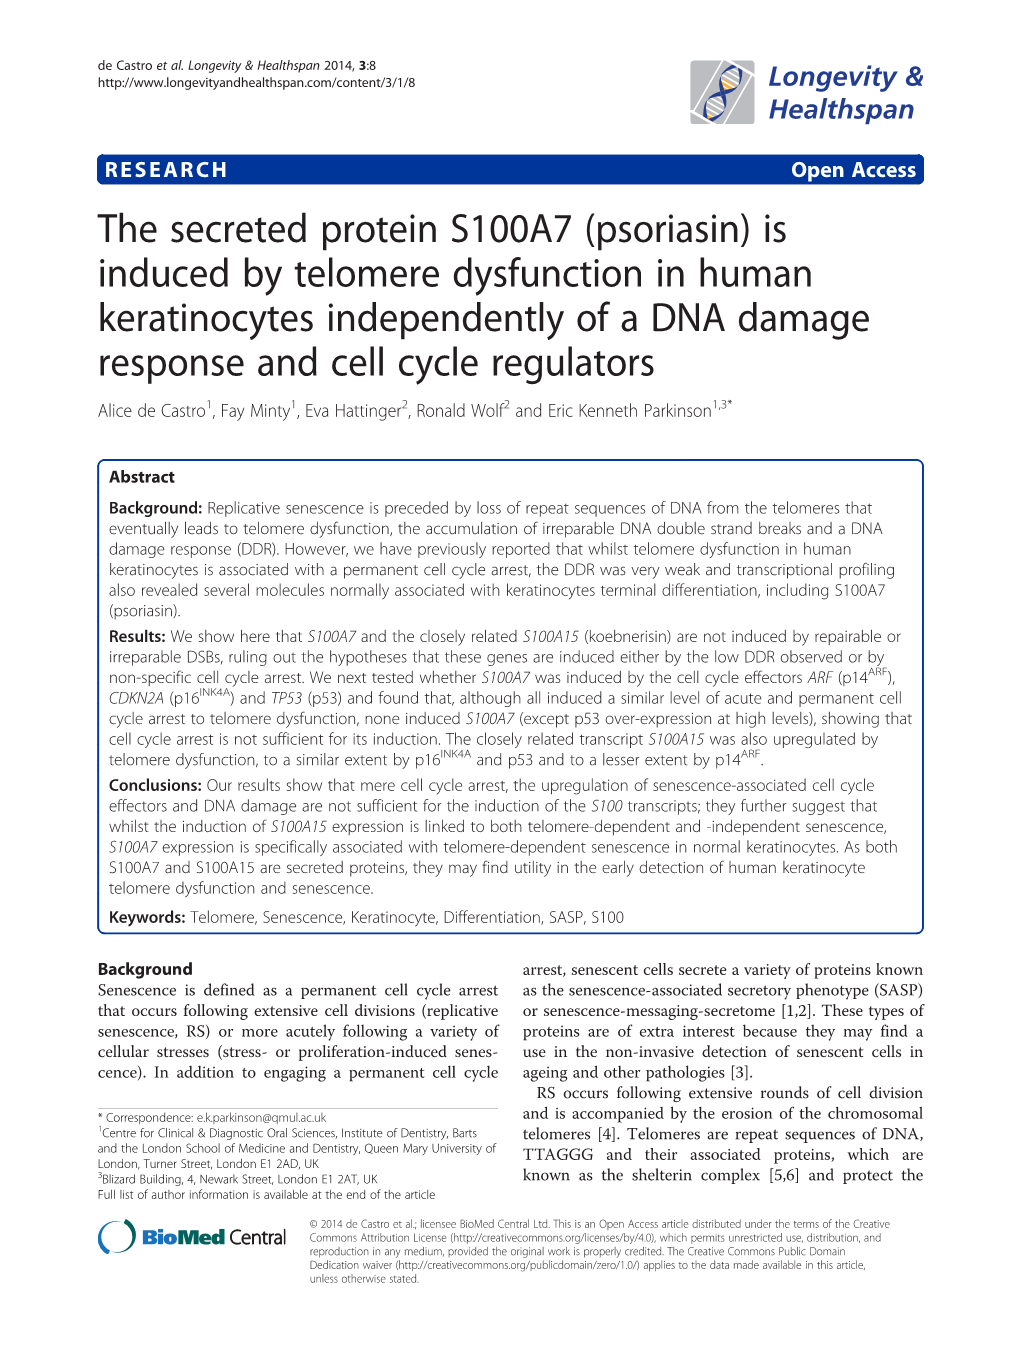 (Psoriasin) Is Induced by Telomere Dysfunction in Human Keratinocytes